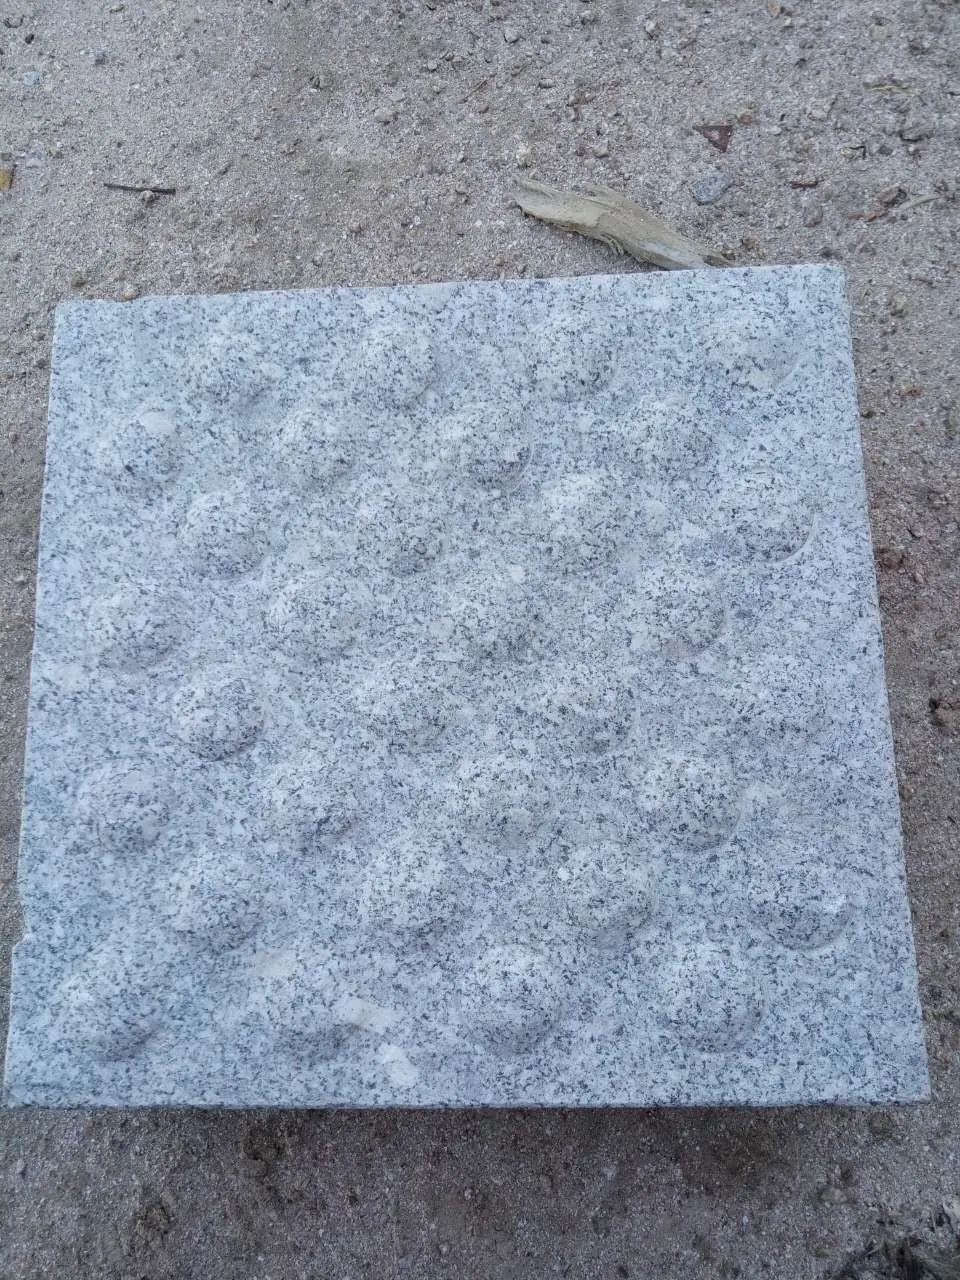 Tactile China Factory Manufacture Granite Slabs Natural Stone Tactile Stone For Granite Blind Stone Public Area Running Road Paving